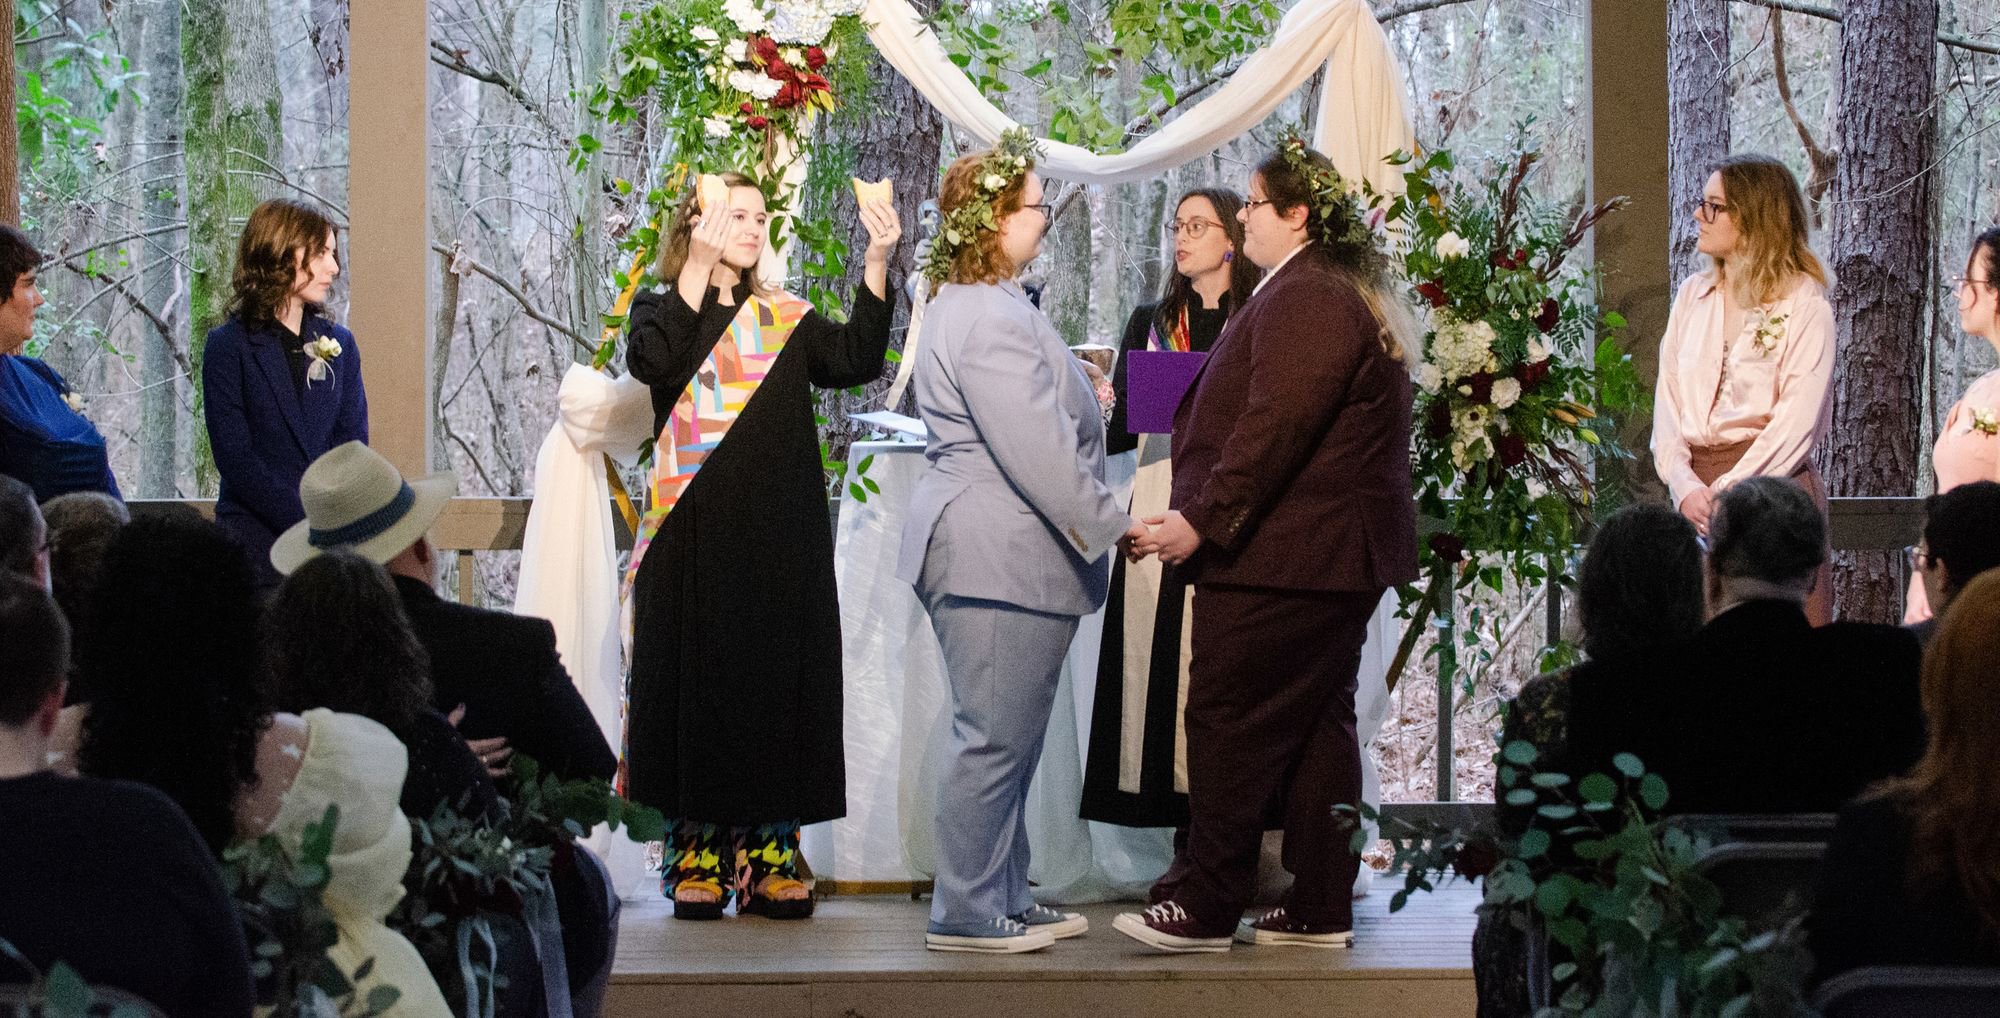 The Rev. Elizabeth Davidson, arms raised, and the Rev. Paige Swaim-Presley hold Communion elements during the wedding of Matty Cafiero and their partner, Myles Cafiero, in Tupelo, Mississippi, in January 2023. Photo courtesy of the Cafieros